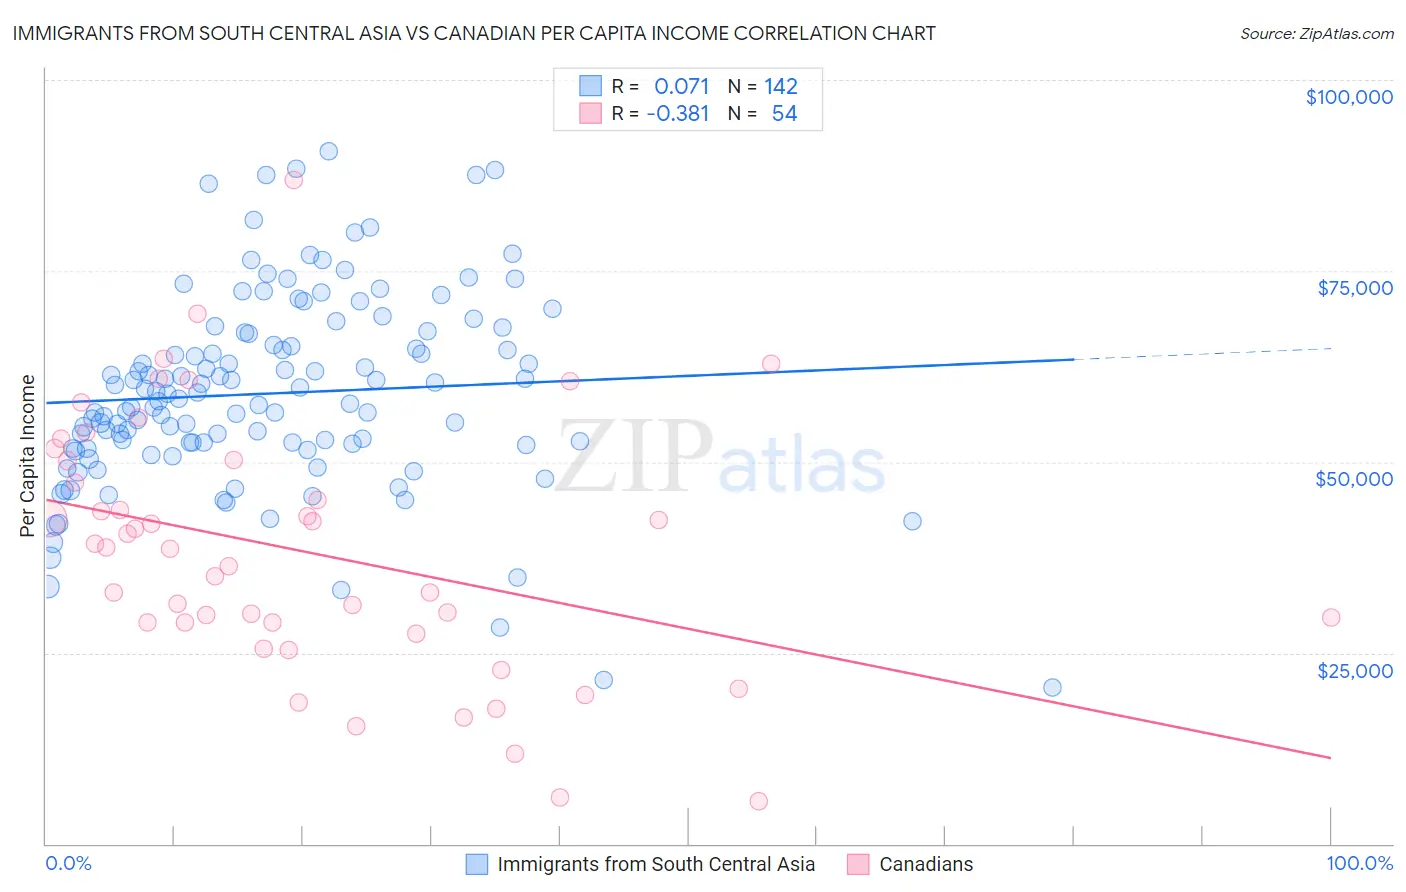 Immigrants from South Central Asia vs Canadian Per Capita Income